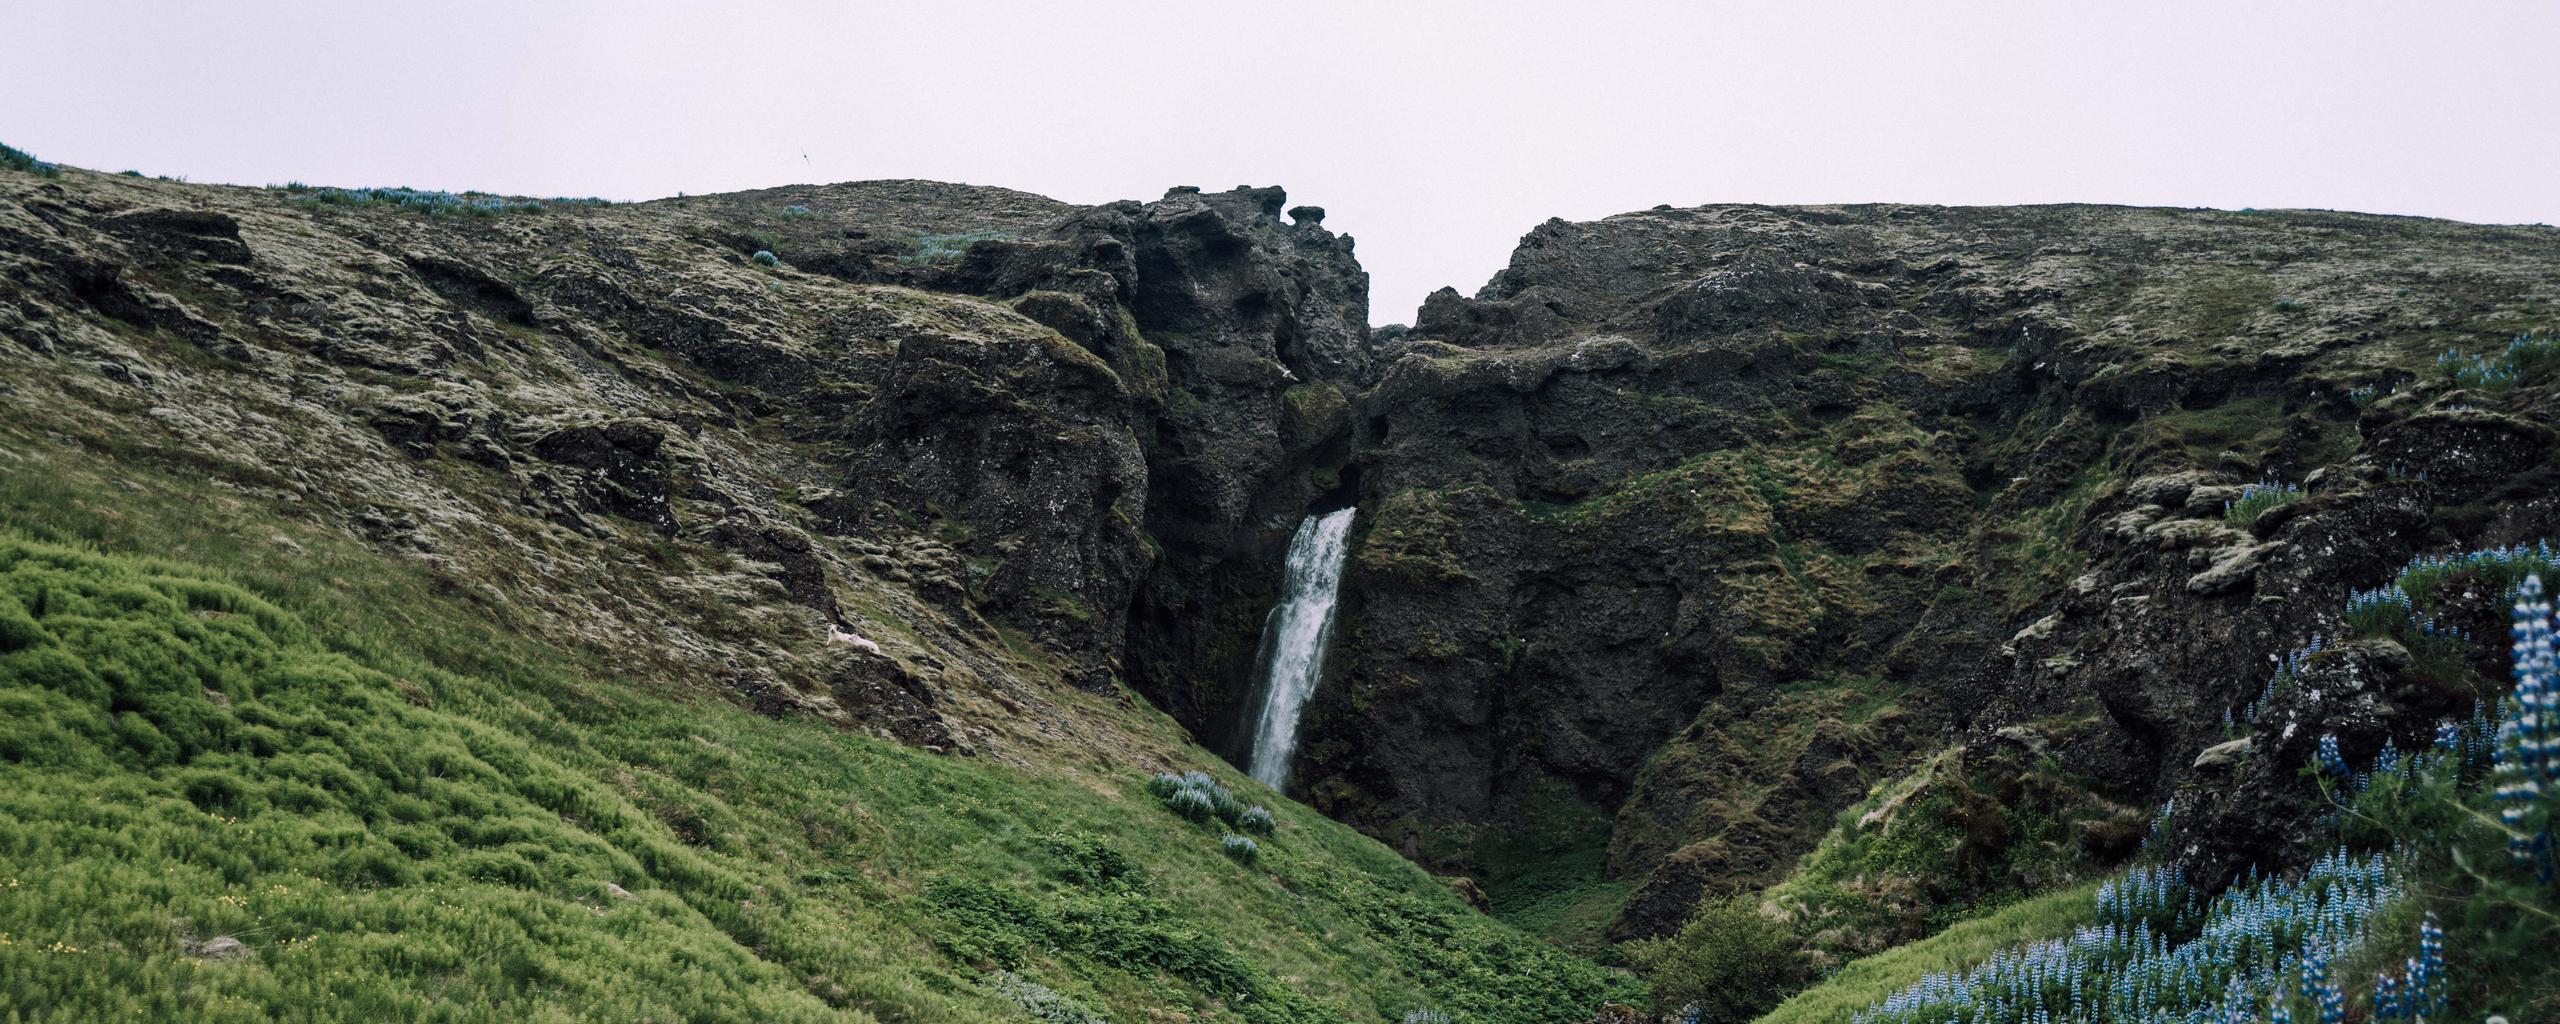 Green rocky field with waterfall in Iceland